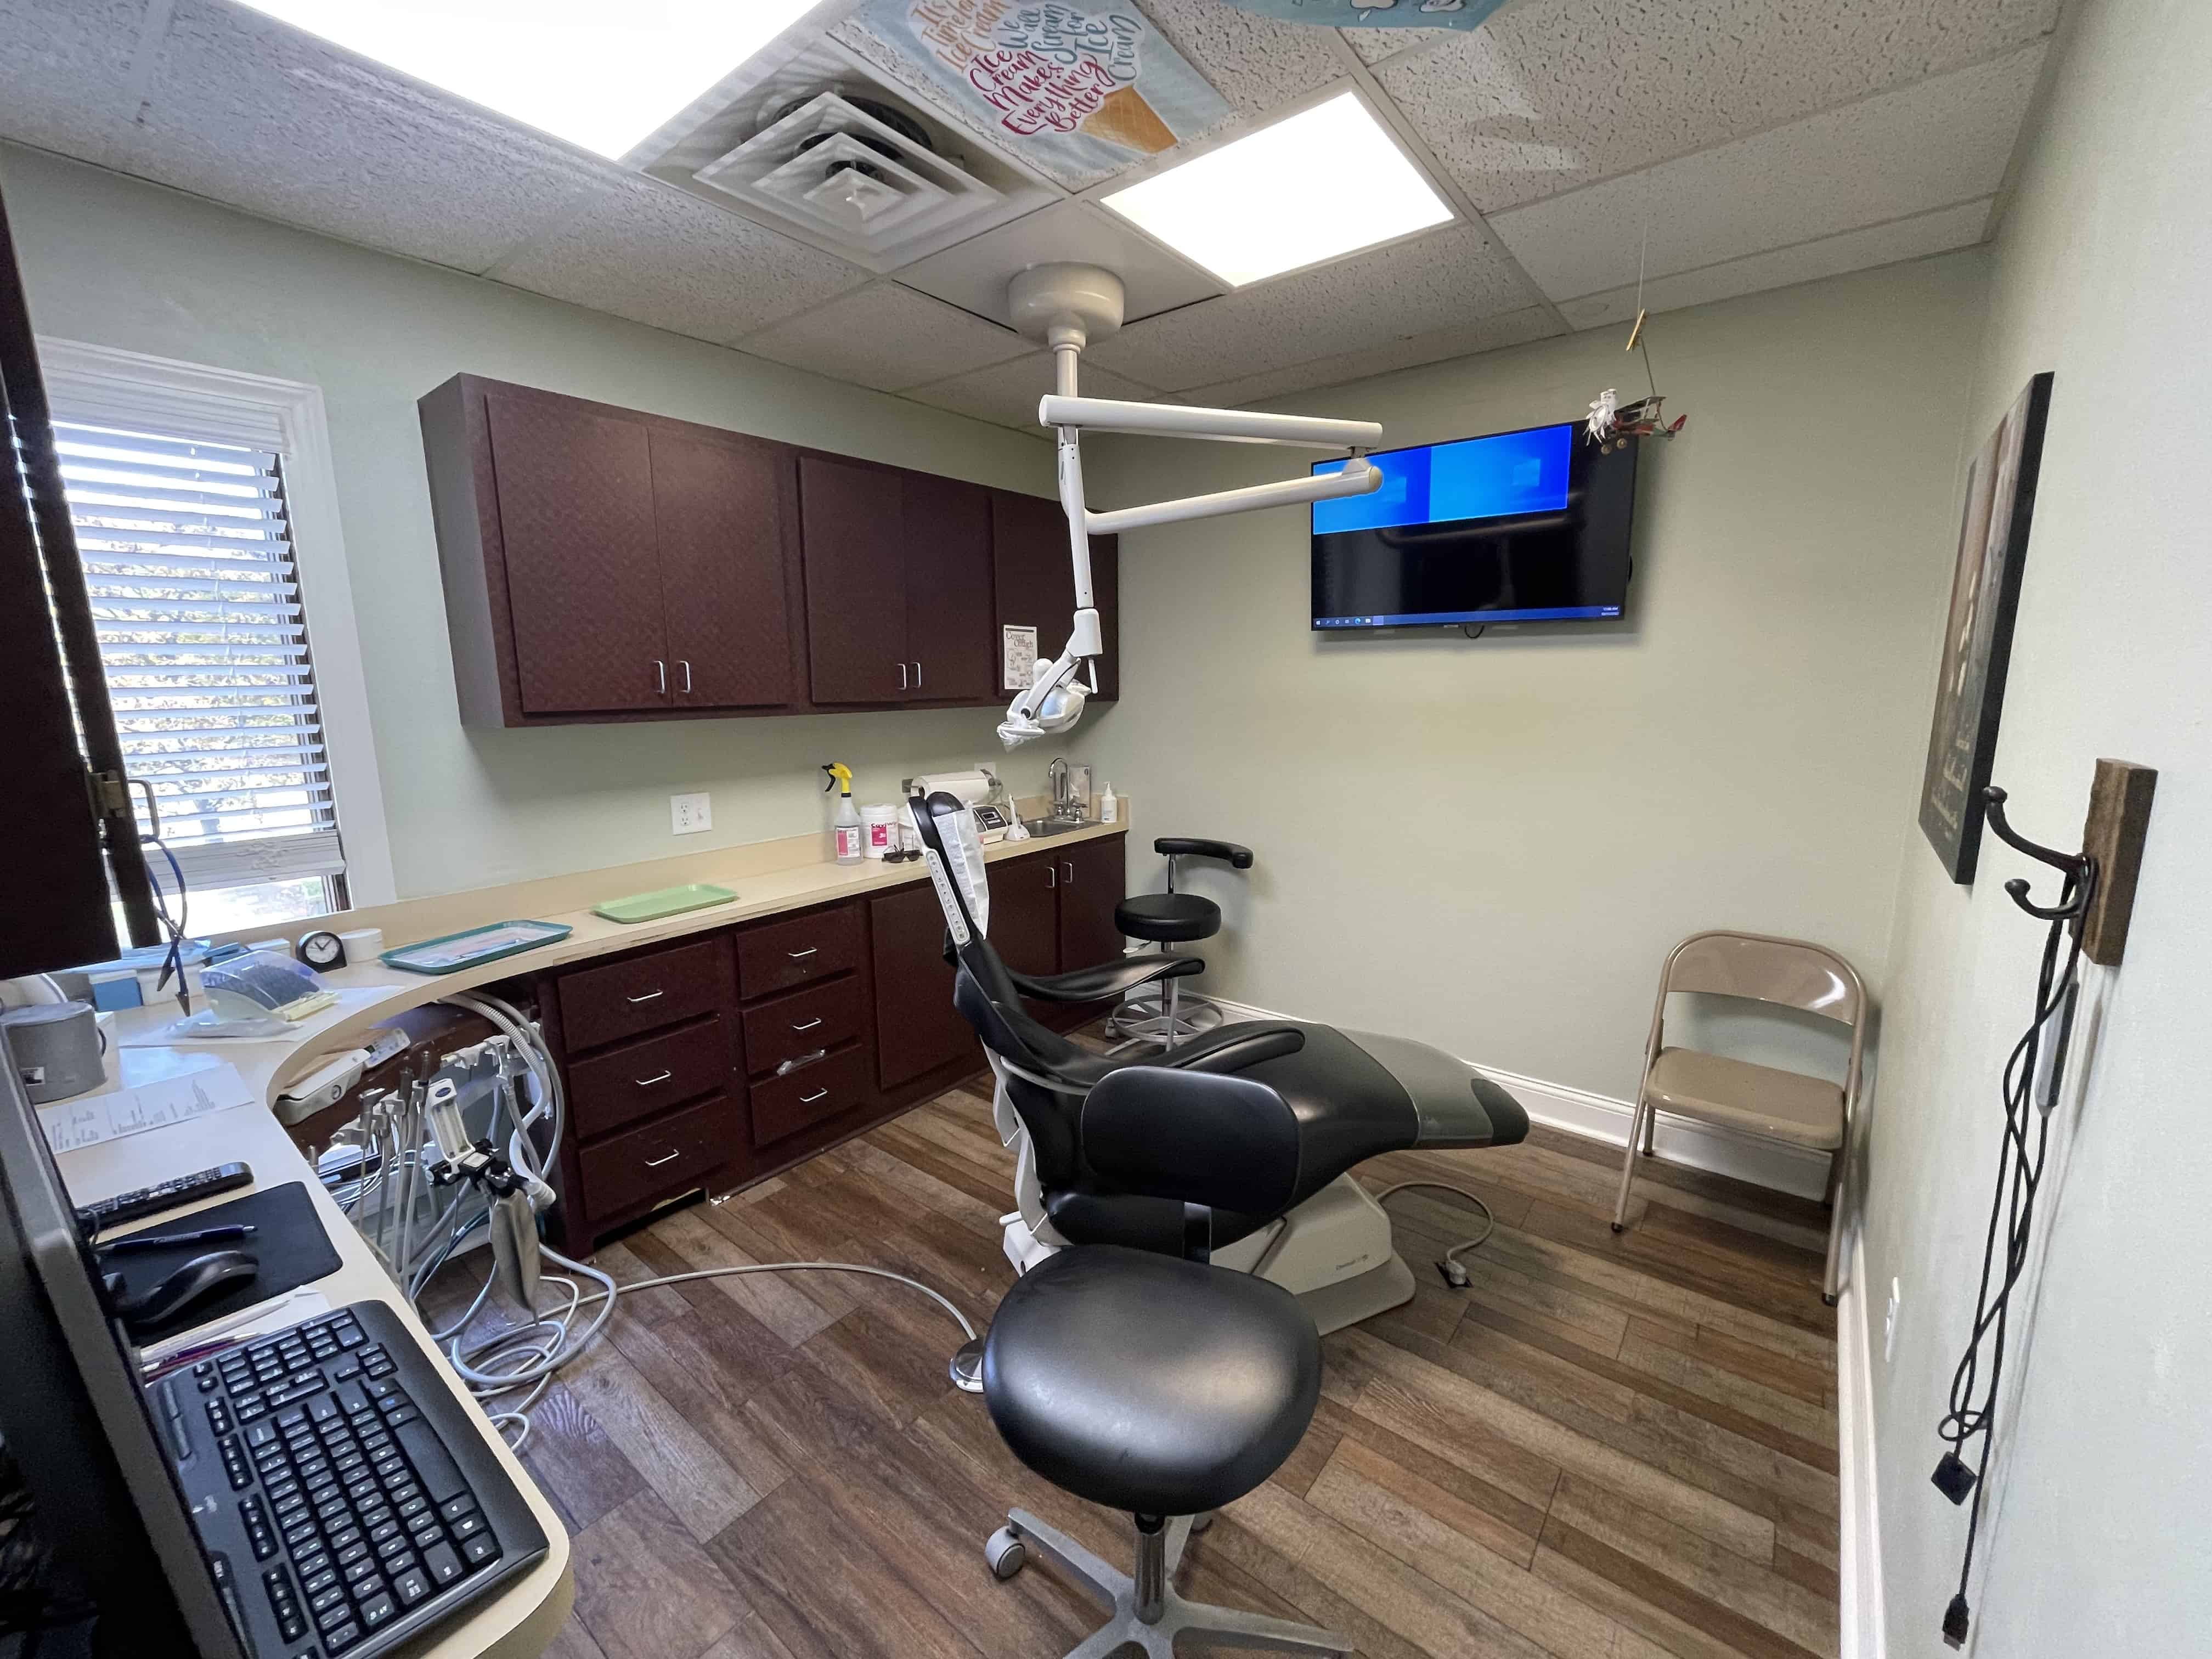 For Sale Fully Occupied NNN Investment Property - Carrollton Family Dental - Pappas Realty Co. 2